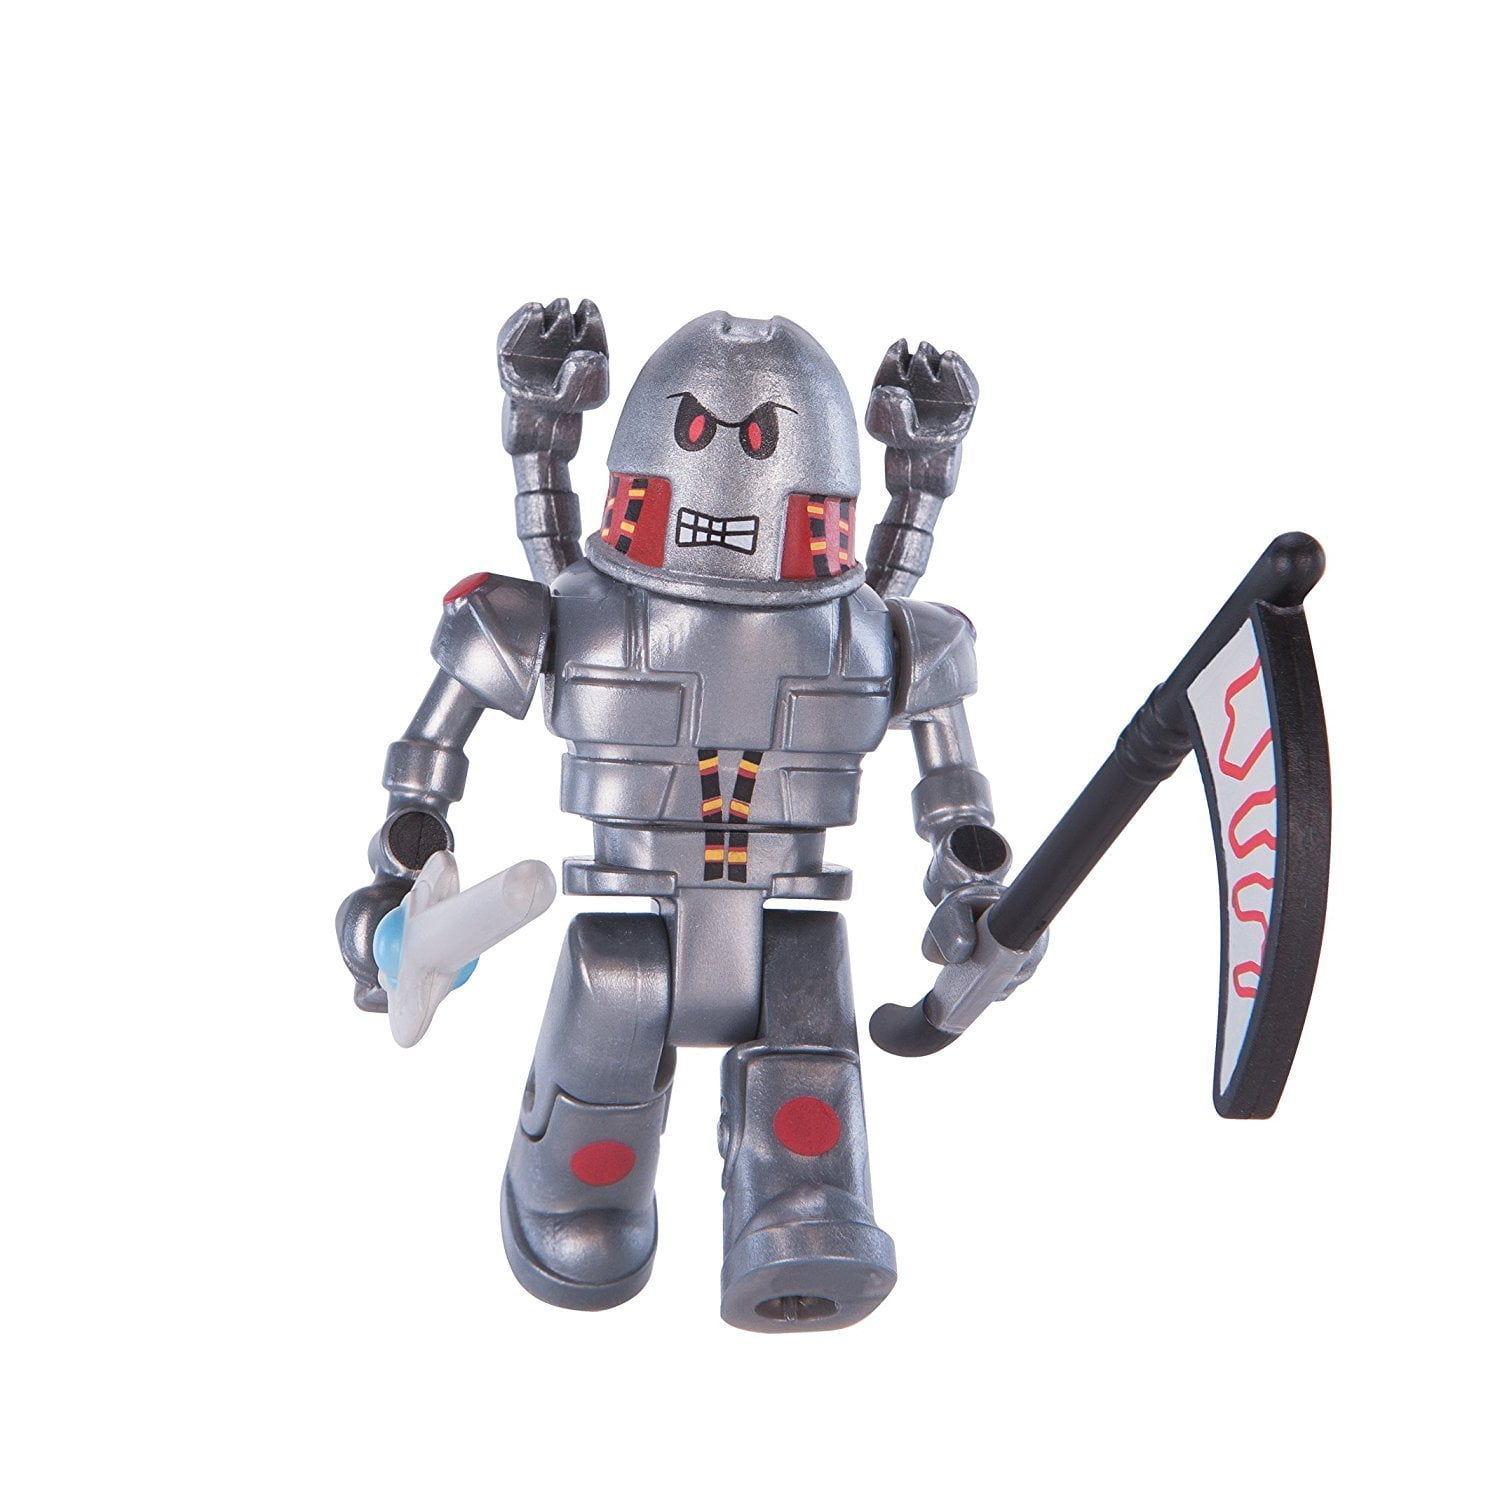 Roblox Action Bundle Includes 1 Circuit Breaker Figure Pack Set Of 2 Series 1 Mystery Box Toys Bundle Includes 1 Circuit Breaker Figure Pack 2 Series By Action Media Gifts Walmart Com Walmart Com - roblox action bundle includes 1 circuit breaker figure pack